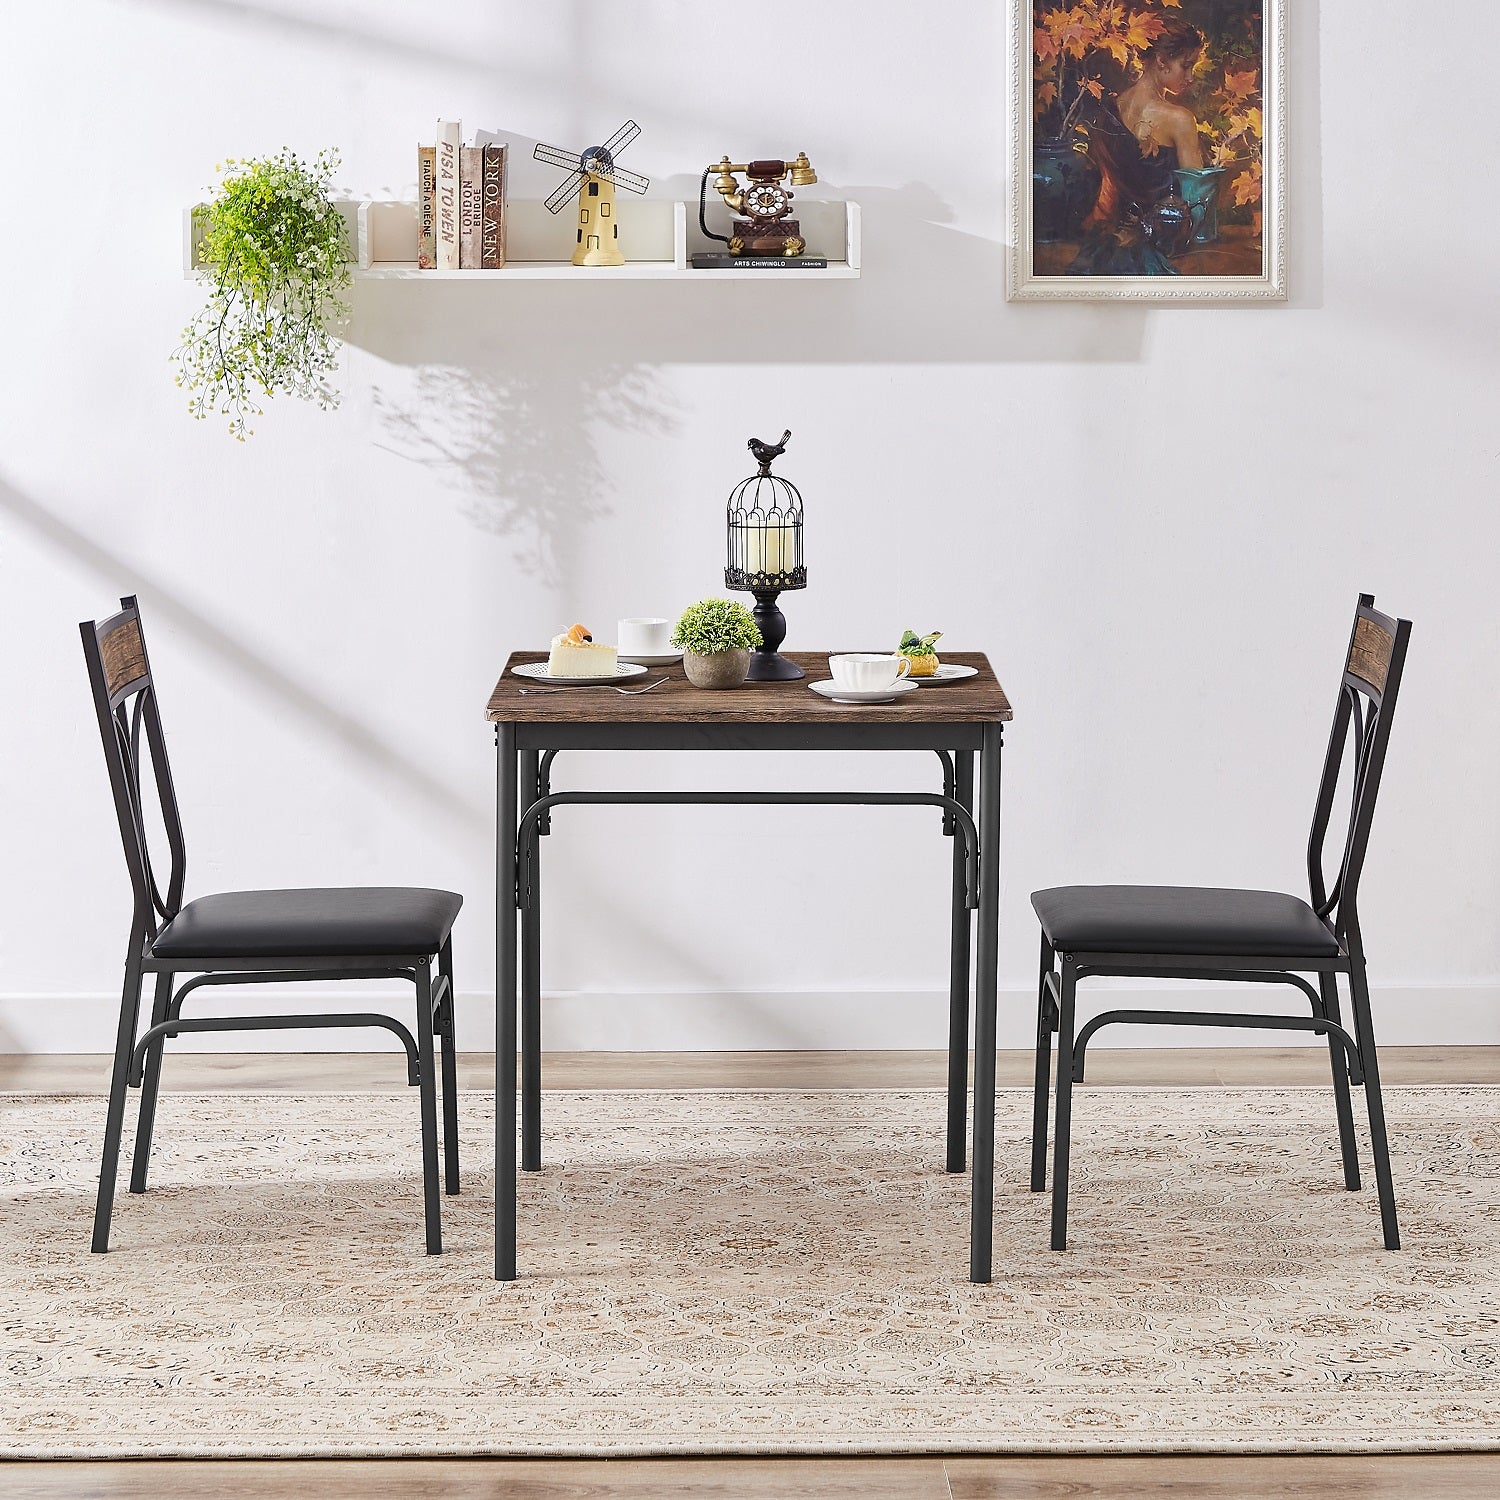 VECELO Industrial Style 3-Piece Dining Room Table Set with 2 PU Padded Chairs, Dark Brown